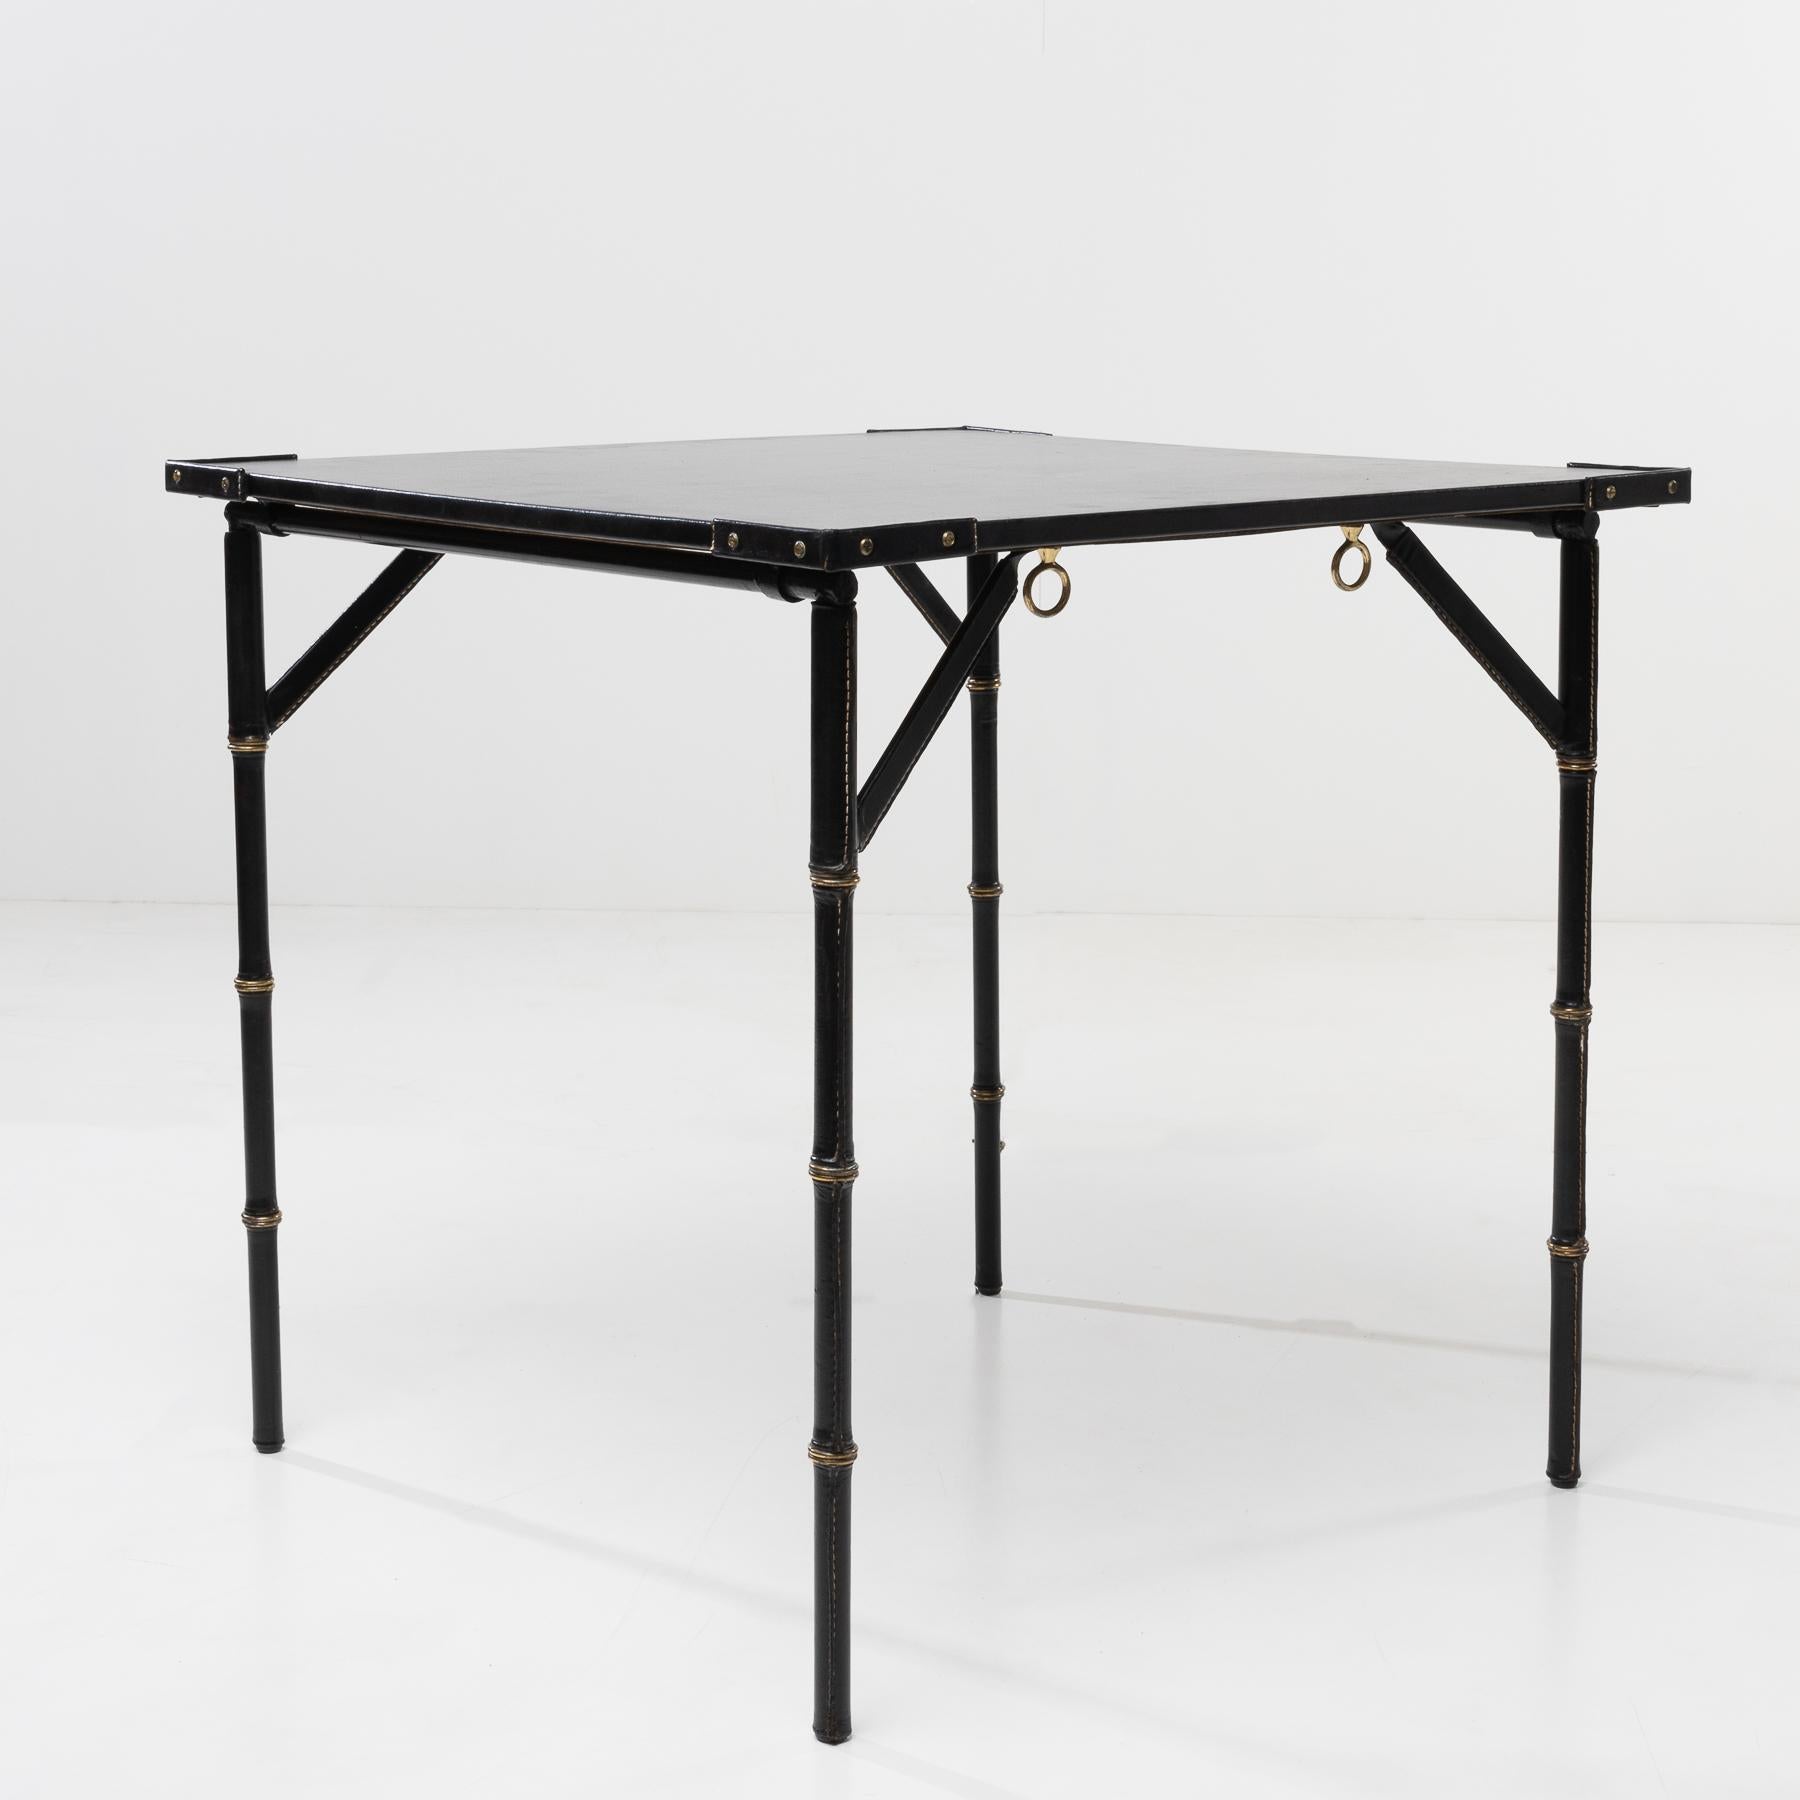 Bridge table with folding legs, entirely covered in saddle stitched leather.
Steel legs covered in saddle stitched black leather.
The top also covered in leather, the accessories in bronze.
This bridge table or game table can also be used as a